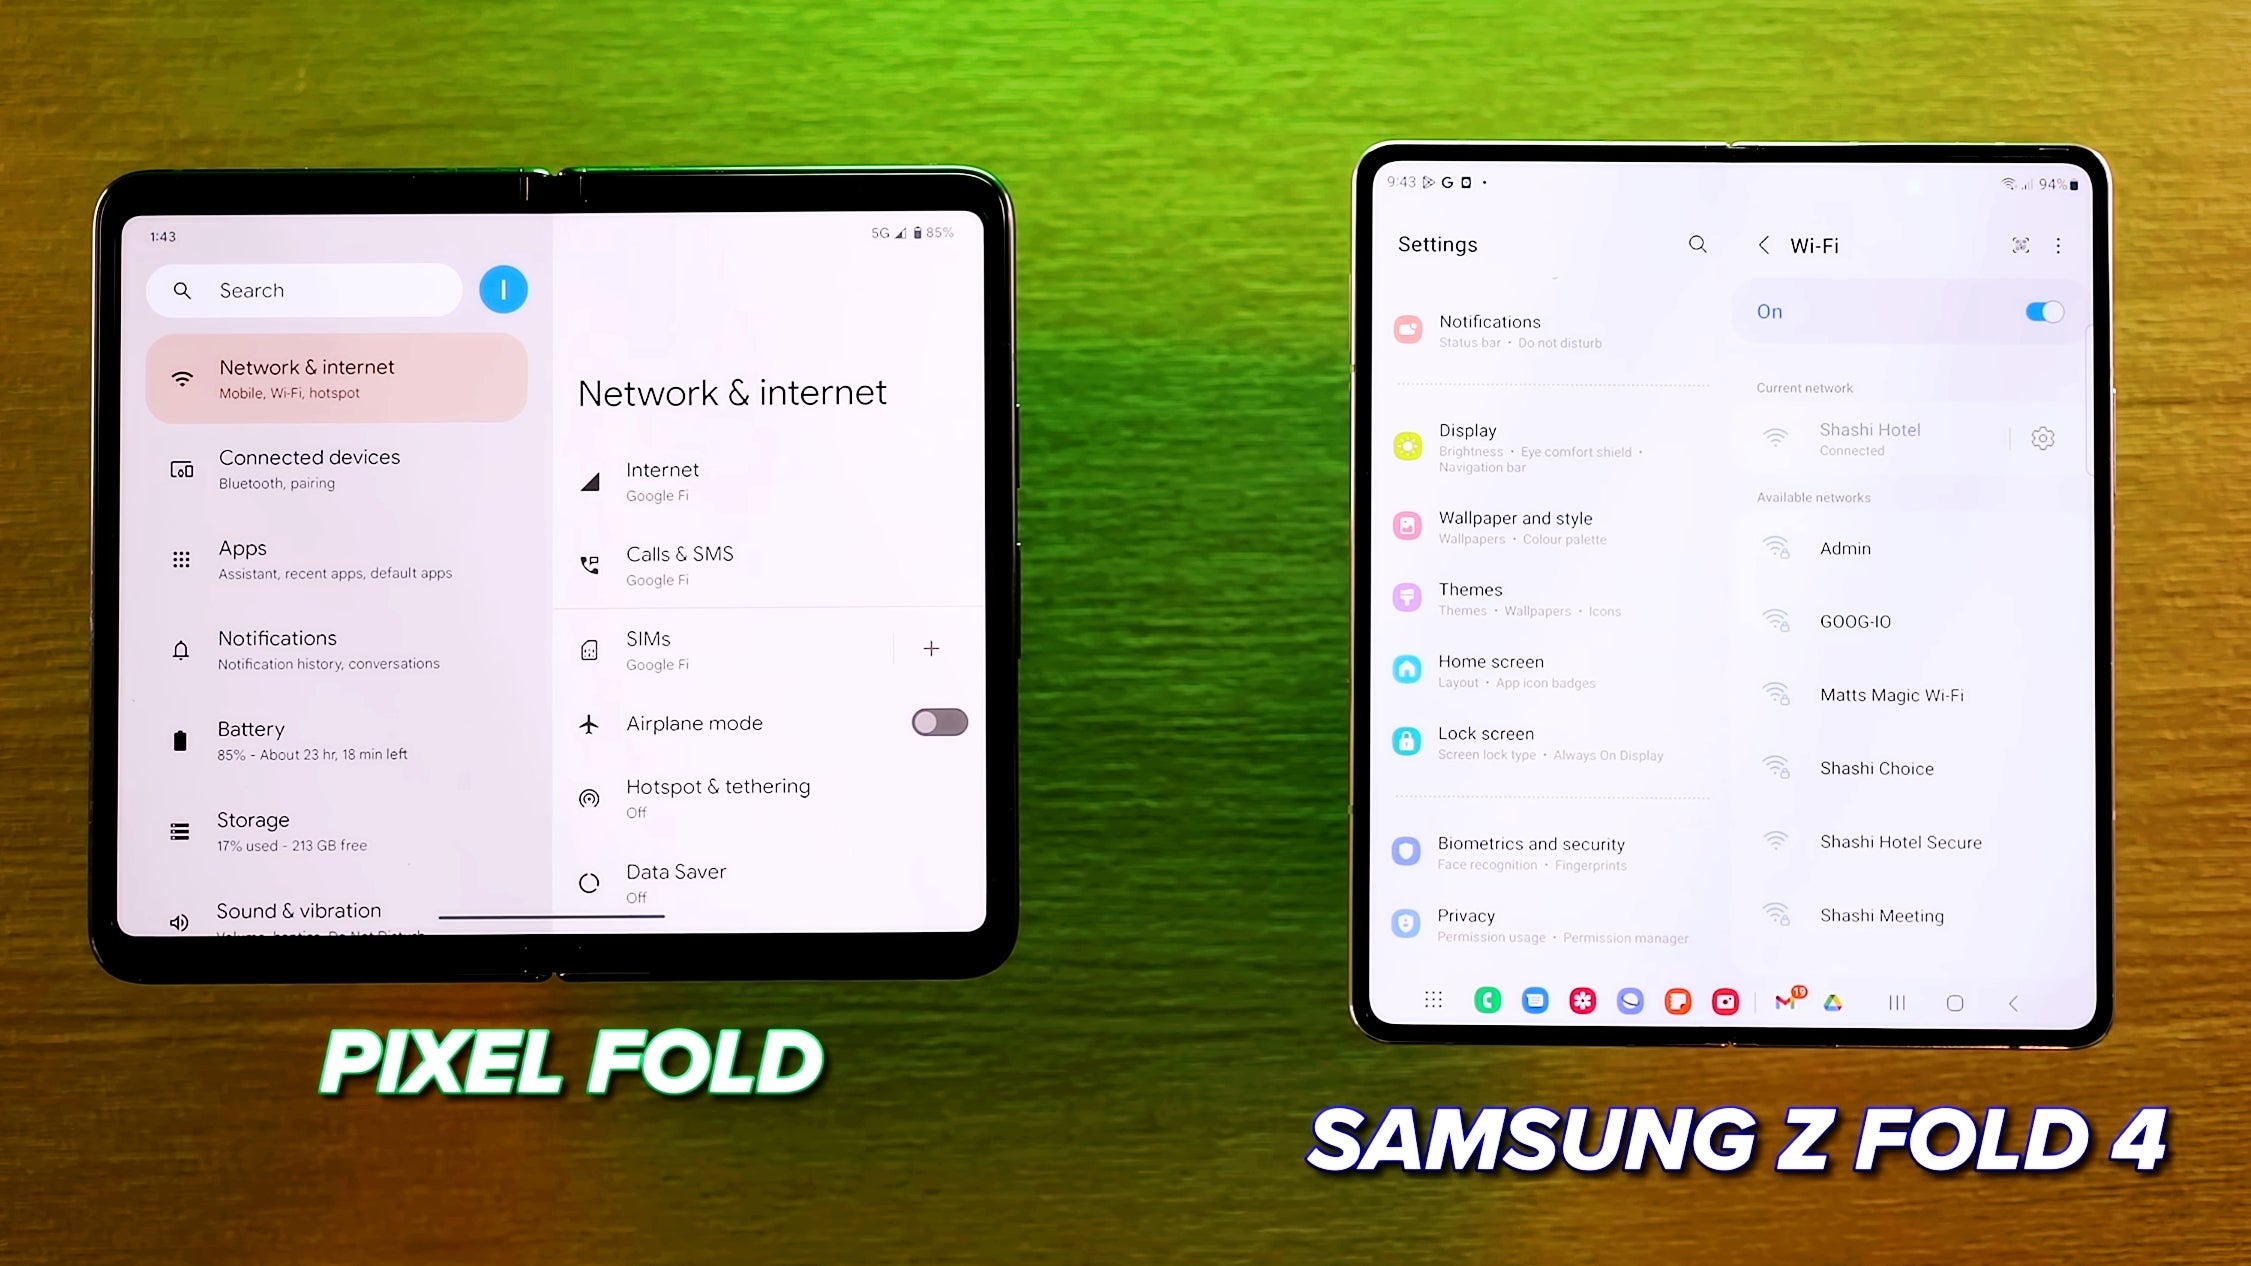 It&#039;s almost like OnePlus saw what Samsung and Google are doing and decided to make a foldable that sits right in the middle in terms of form-factor. - Sorry, Google! The incredible OnePlus Open makes the Pixel Fold look like a prototype